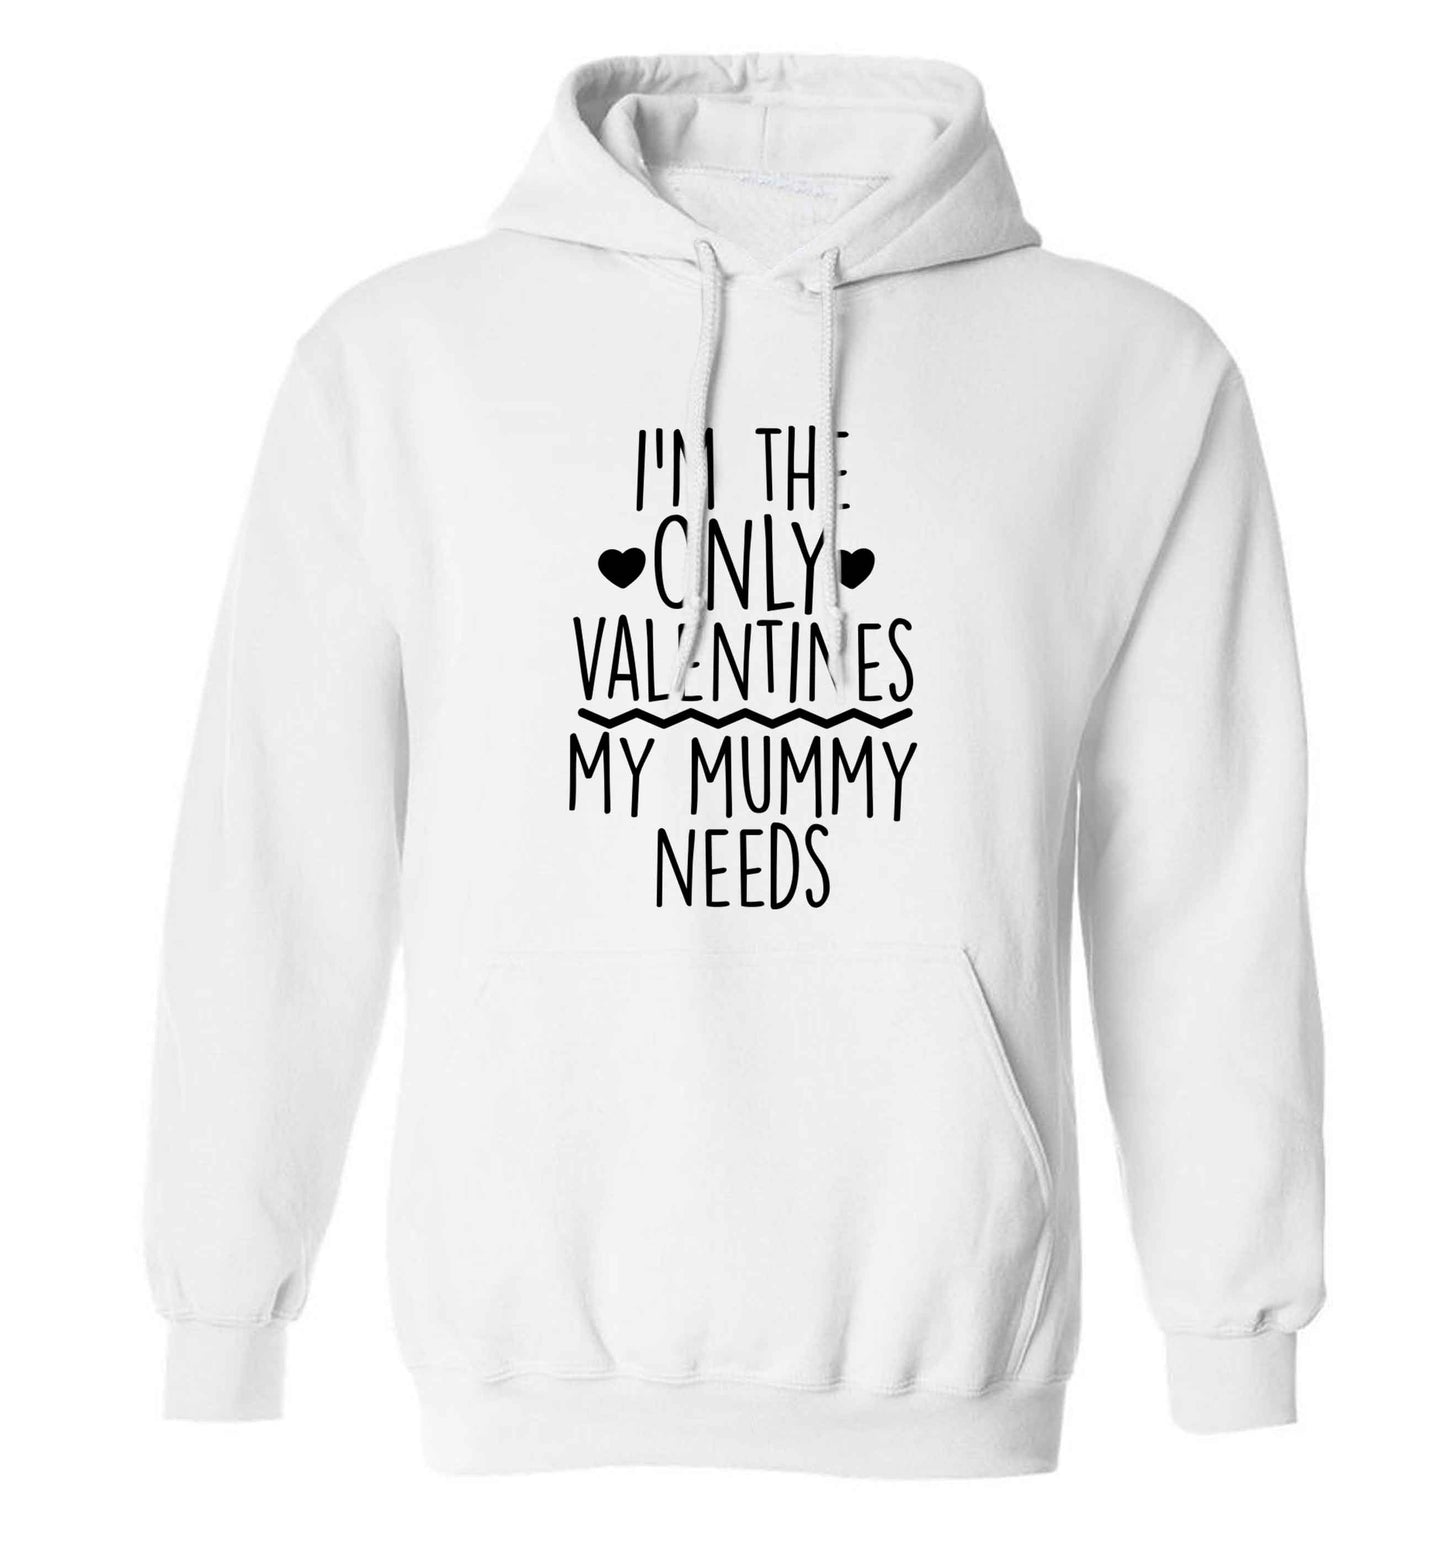 I'm the only valentines my mummy needs adults unisex white hoodie 2XL